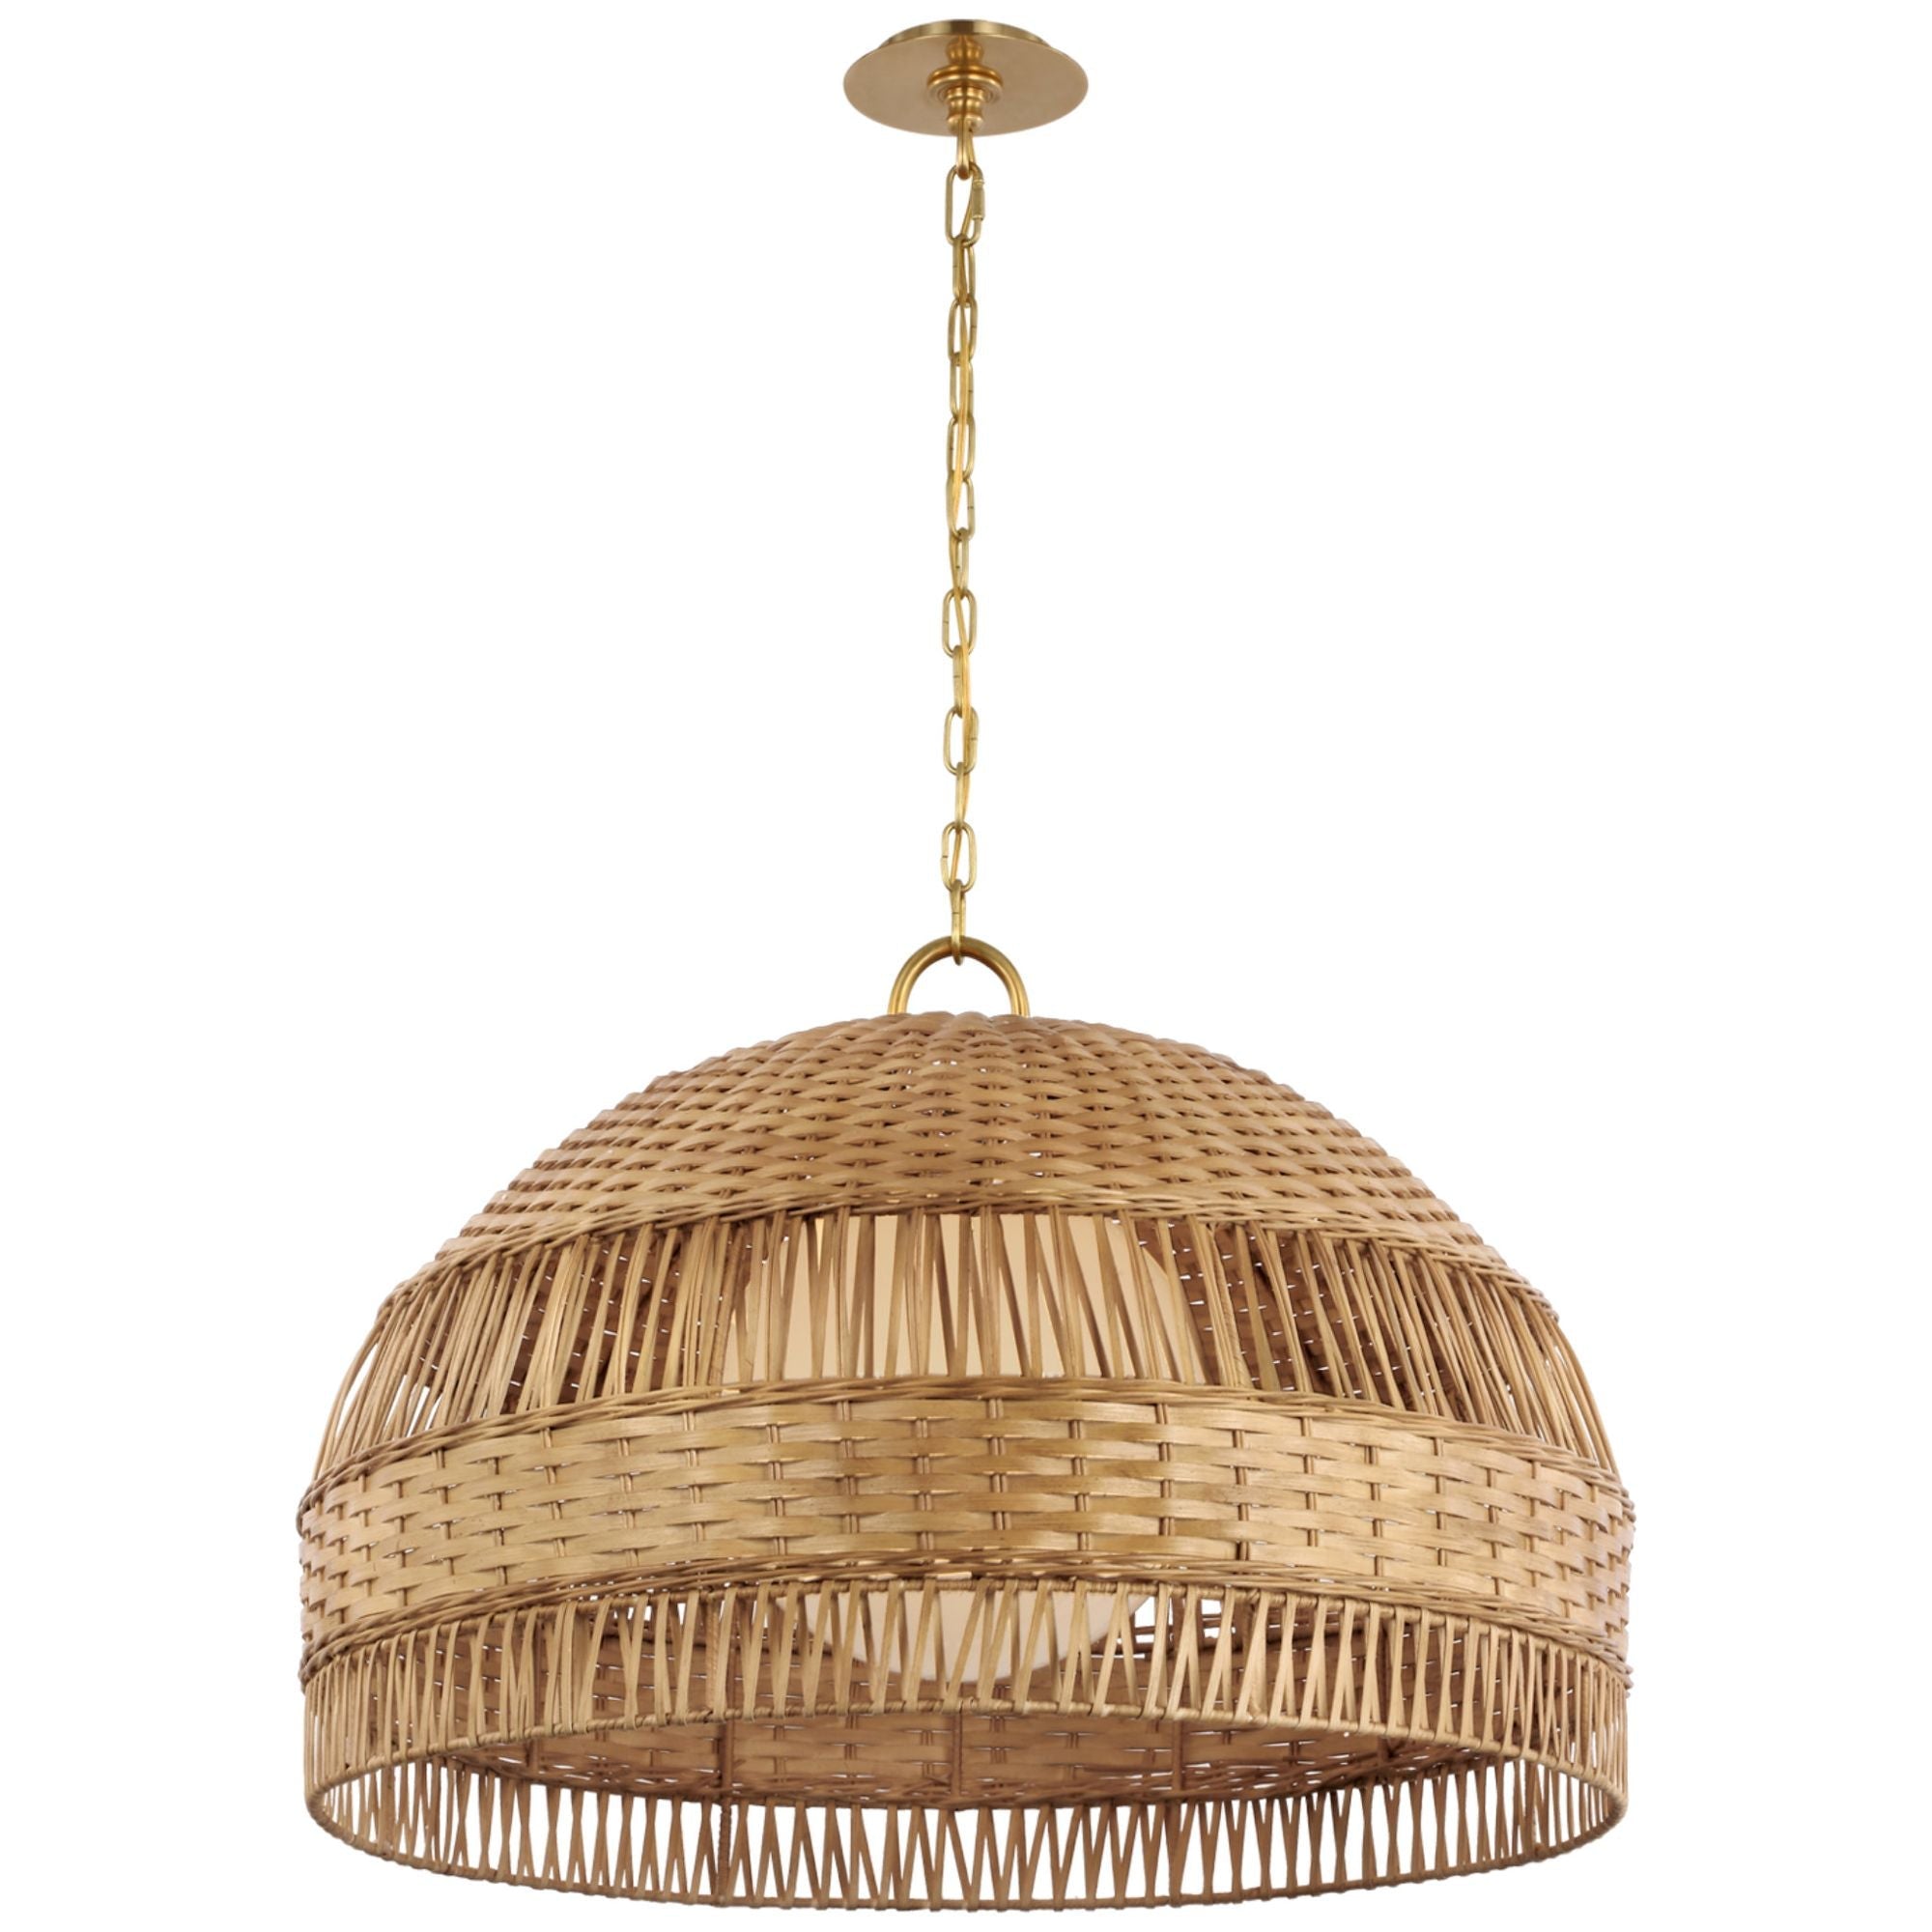 Marie Flanigan Whit Extra Large Dome Hanging Shade in Soft Brass and Natural Wicker